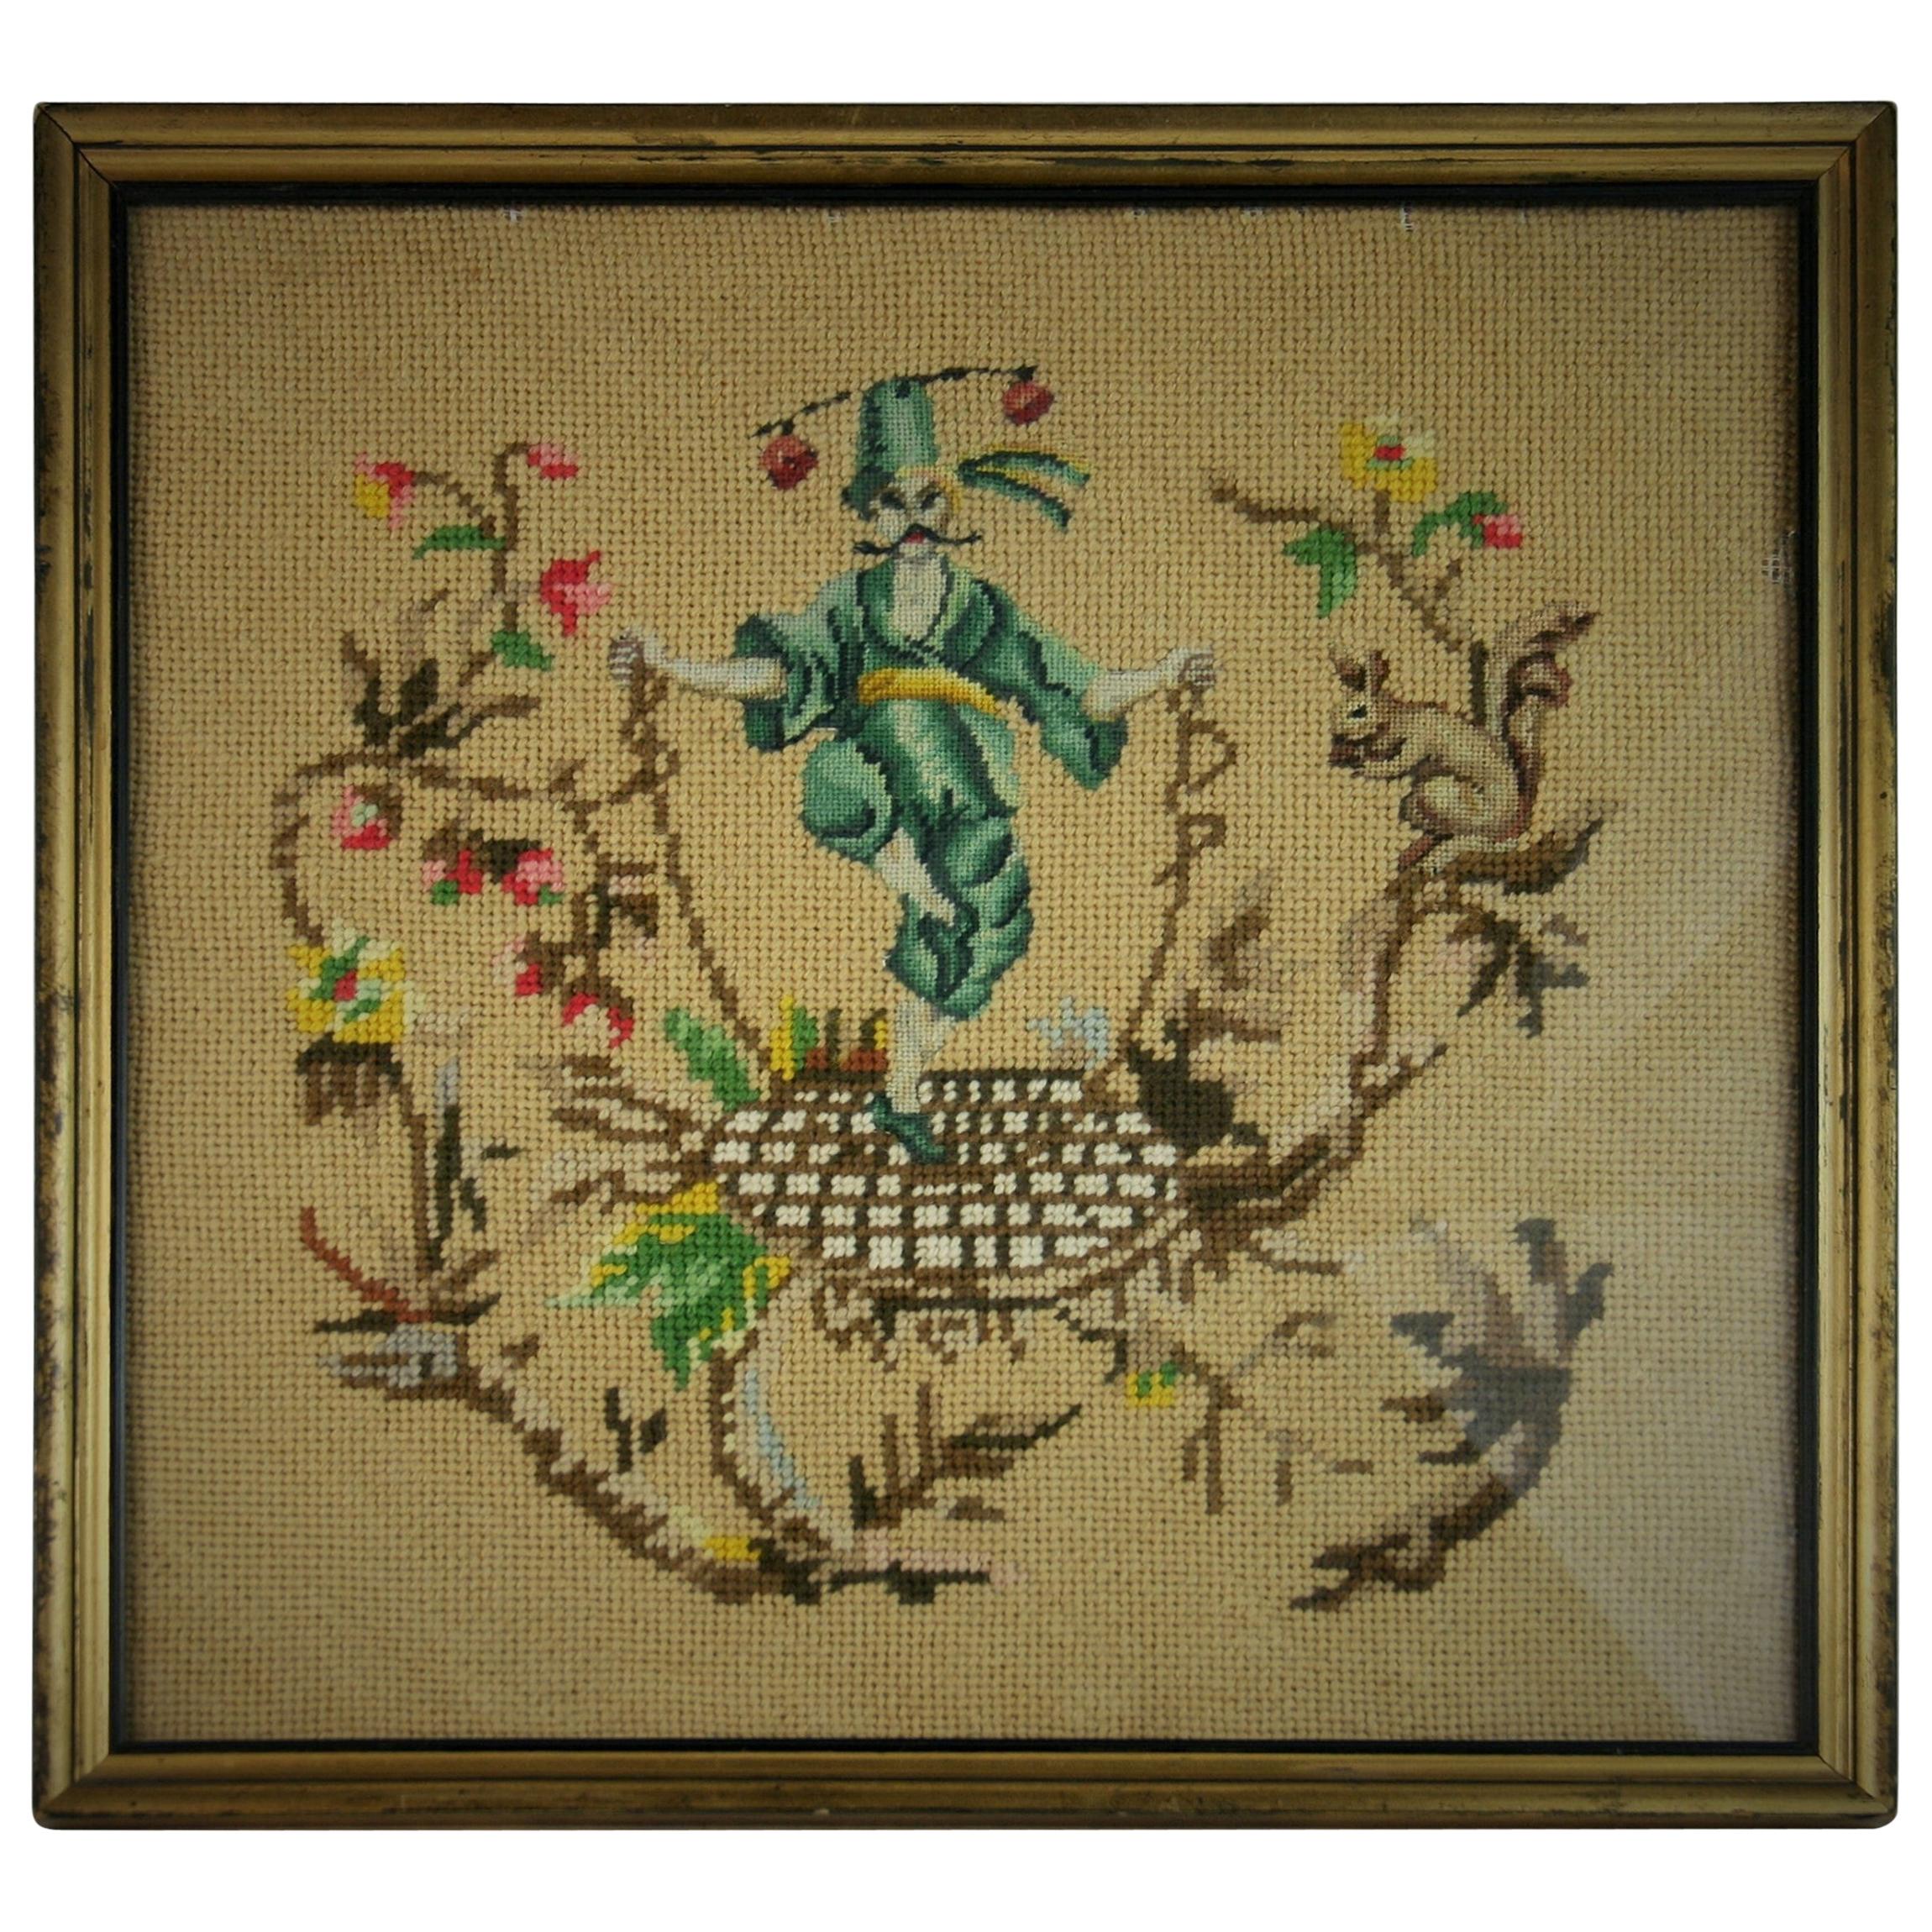 3-398 Handwoven tapestry set in a giltwood frame.